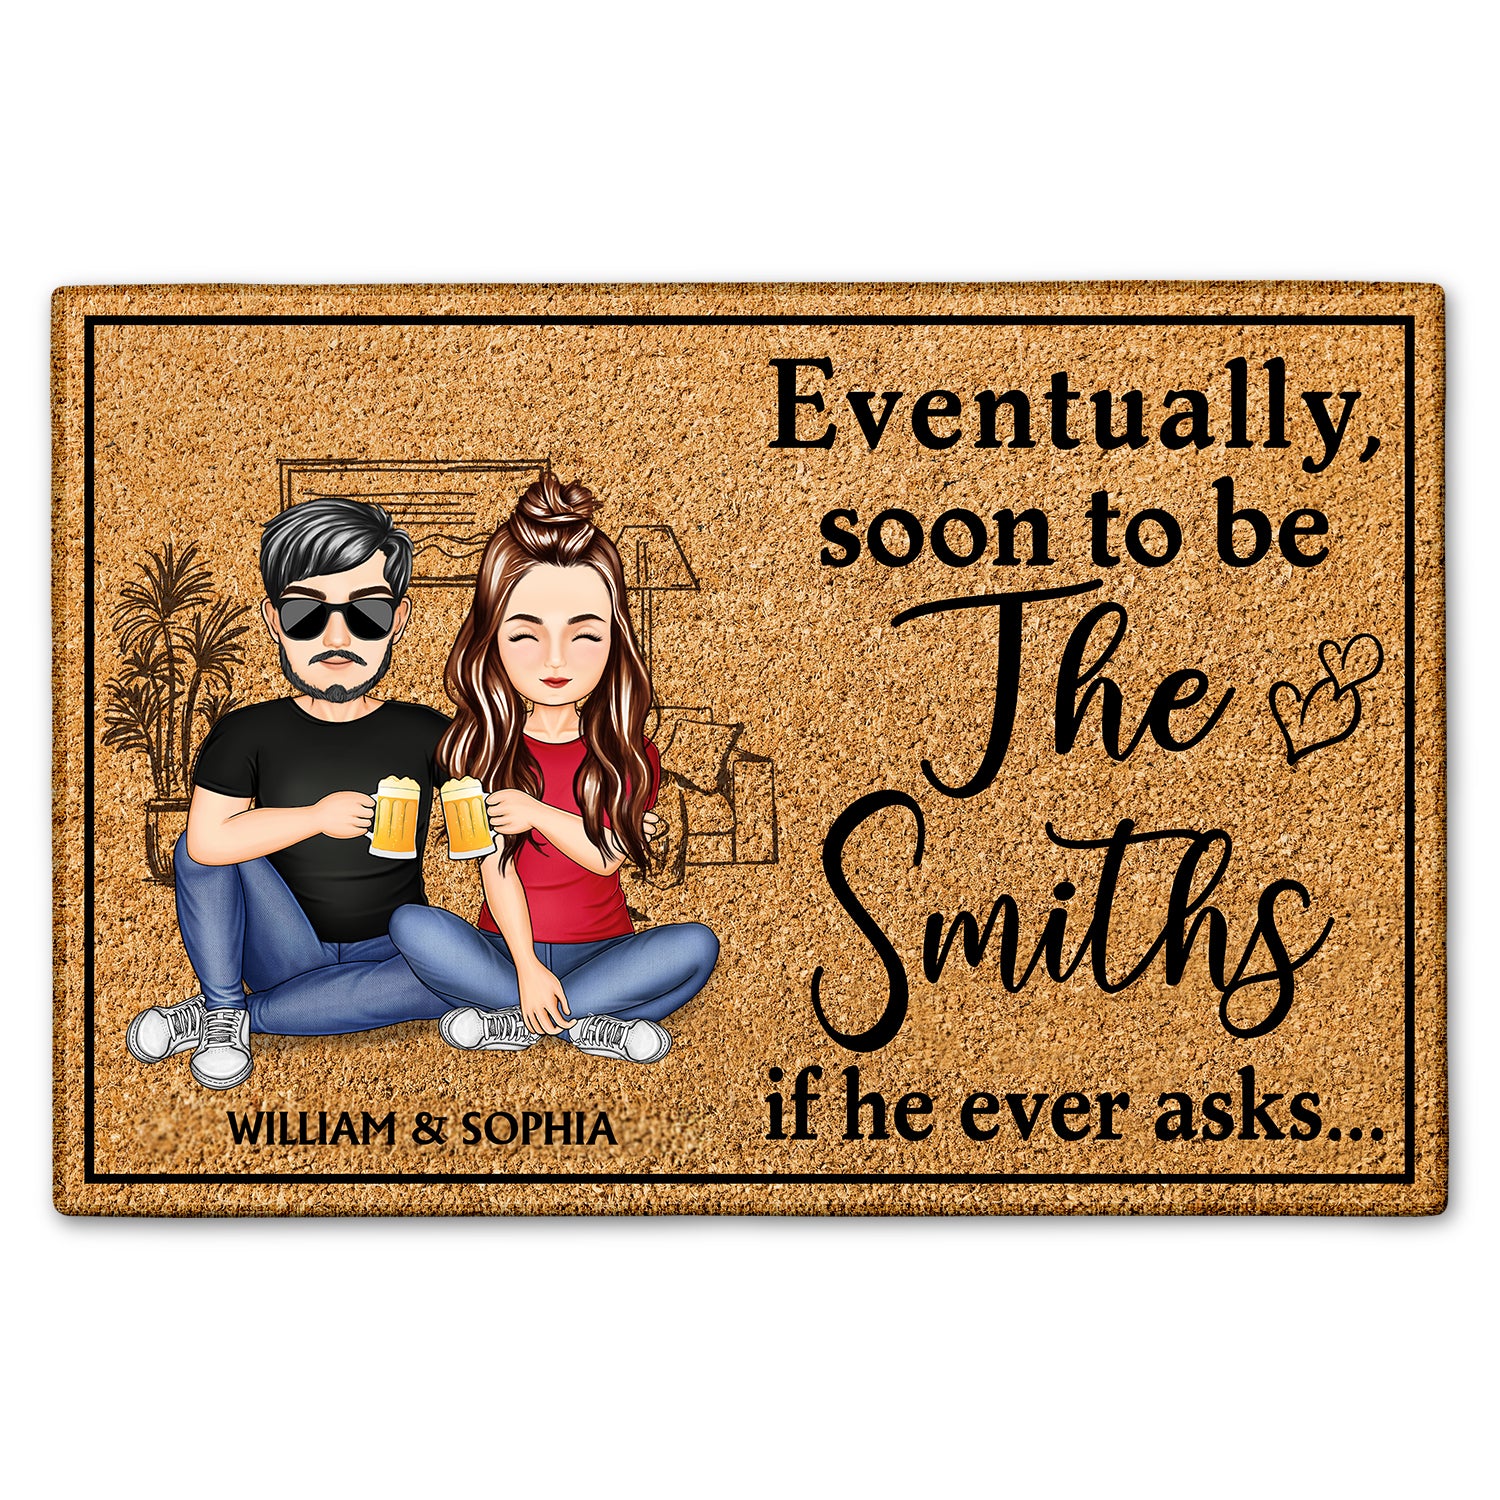 Eventually Soon To Be Family If He Ever Asks - Anniversary, Birthday, Home Decor Gift For Spouse, Lover, Husband, Wife, Boyfriend, Girlfriend, Couple - Personalized Custom Doormat